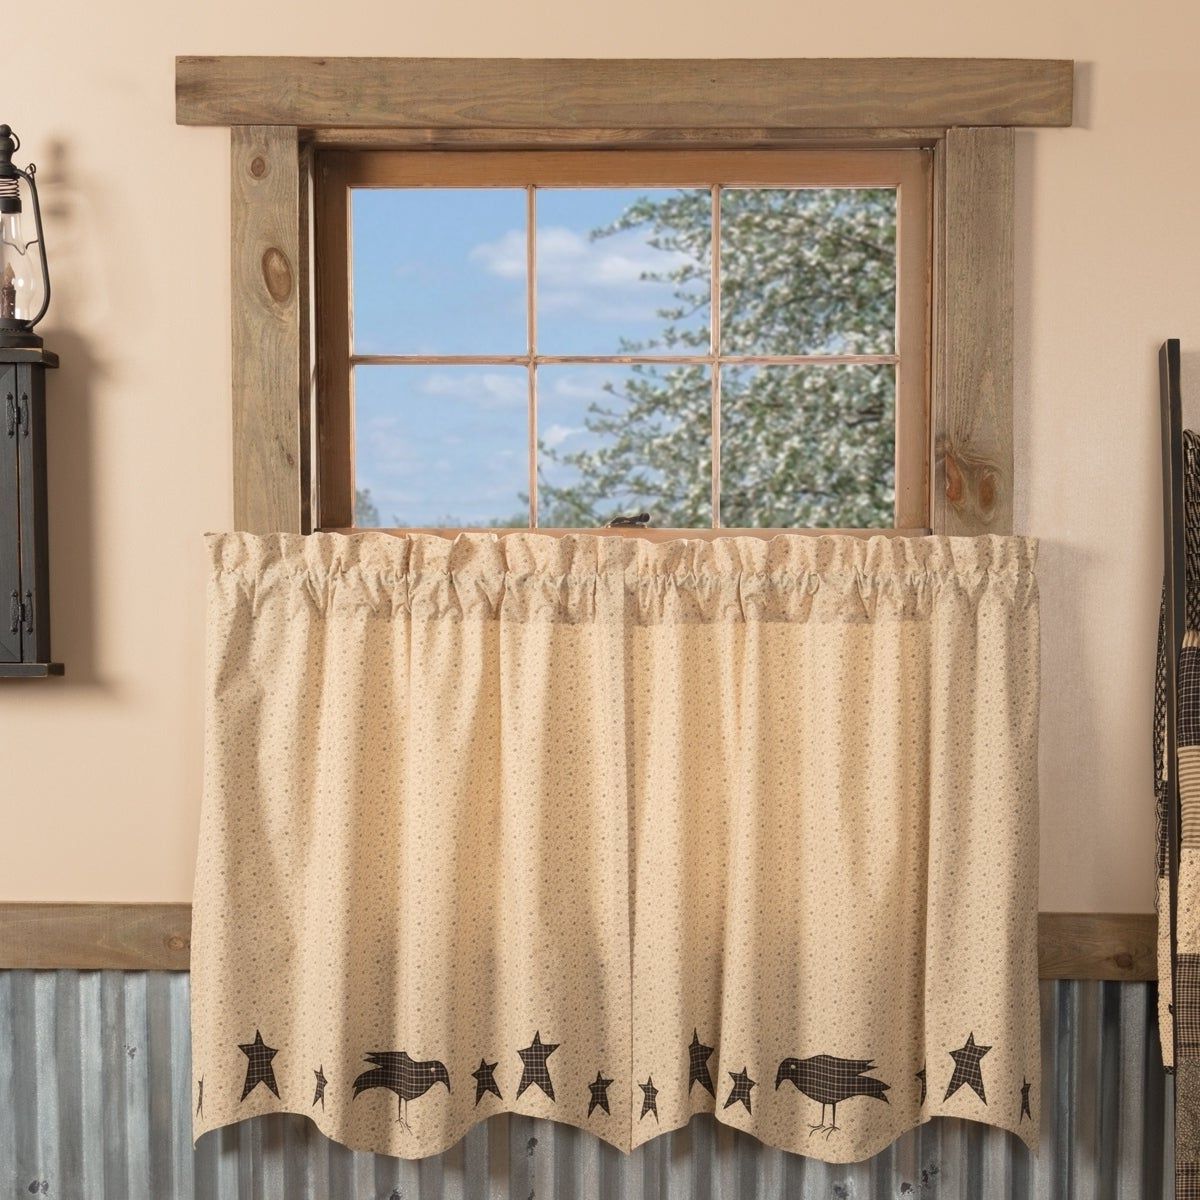 Preferred Tan Primitive Kitchen Curtains Vhc Kettle Grove Crow And Star Tier Pair Rod  Pocket Cotton Star Appliqued Pertaining To Traditional Tailored Tier And Swag Window Curtains Sets With Ornate Flower Garden Print (View 16 of 20)